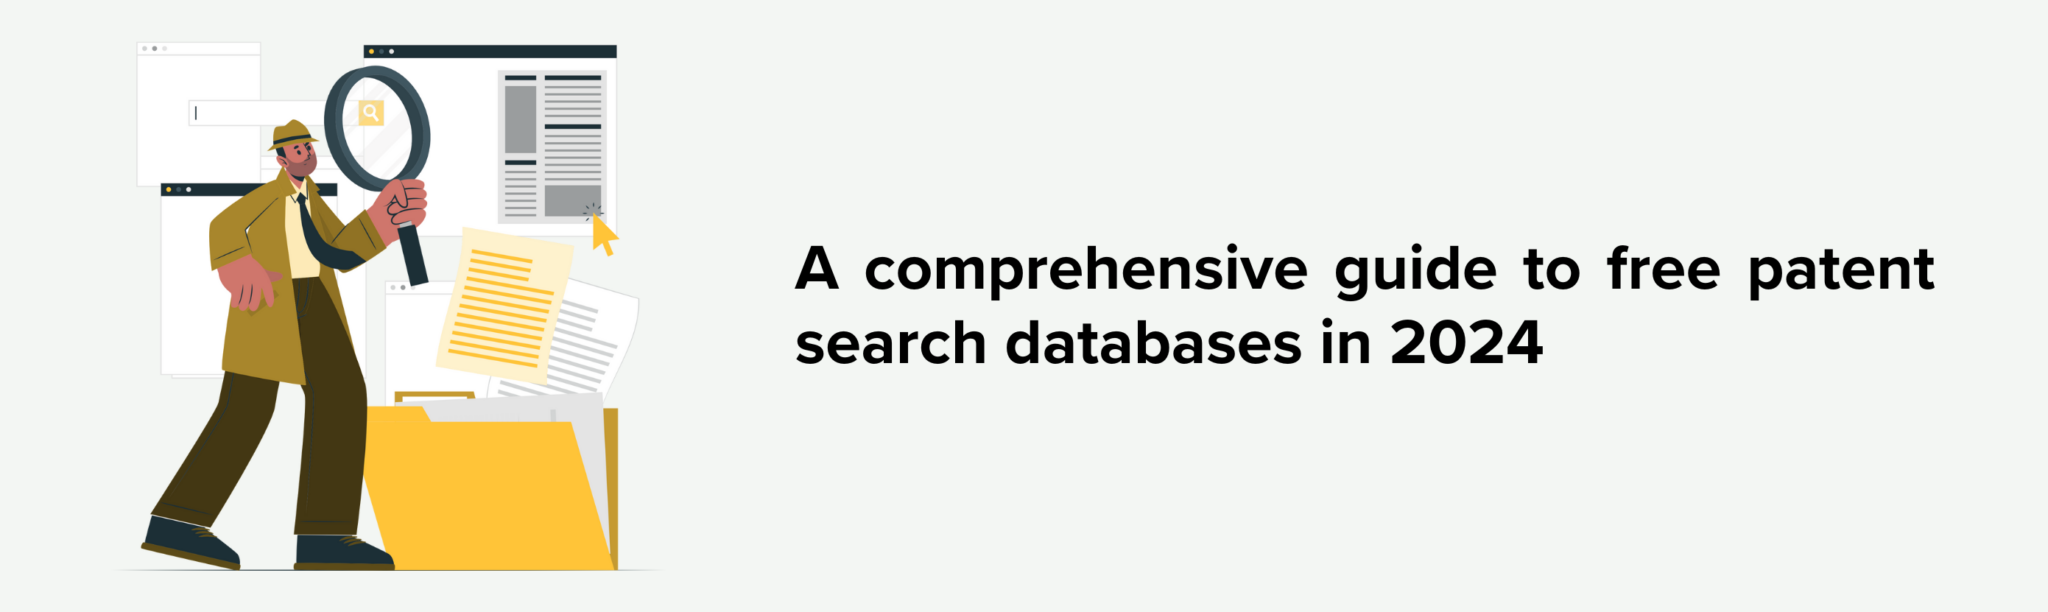 patent search databases